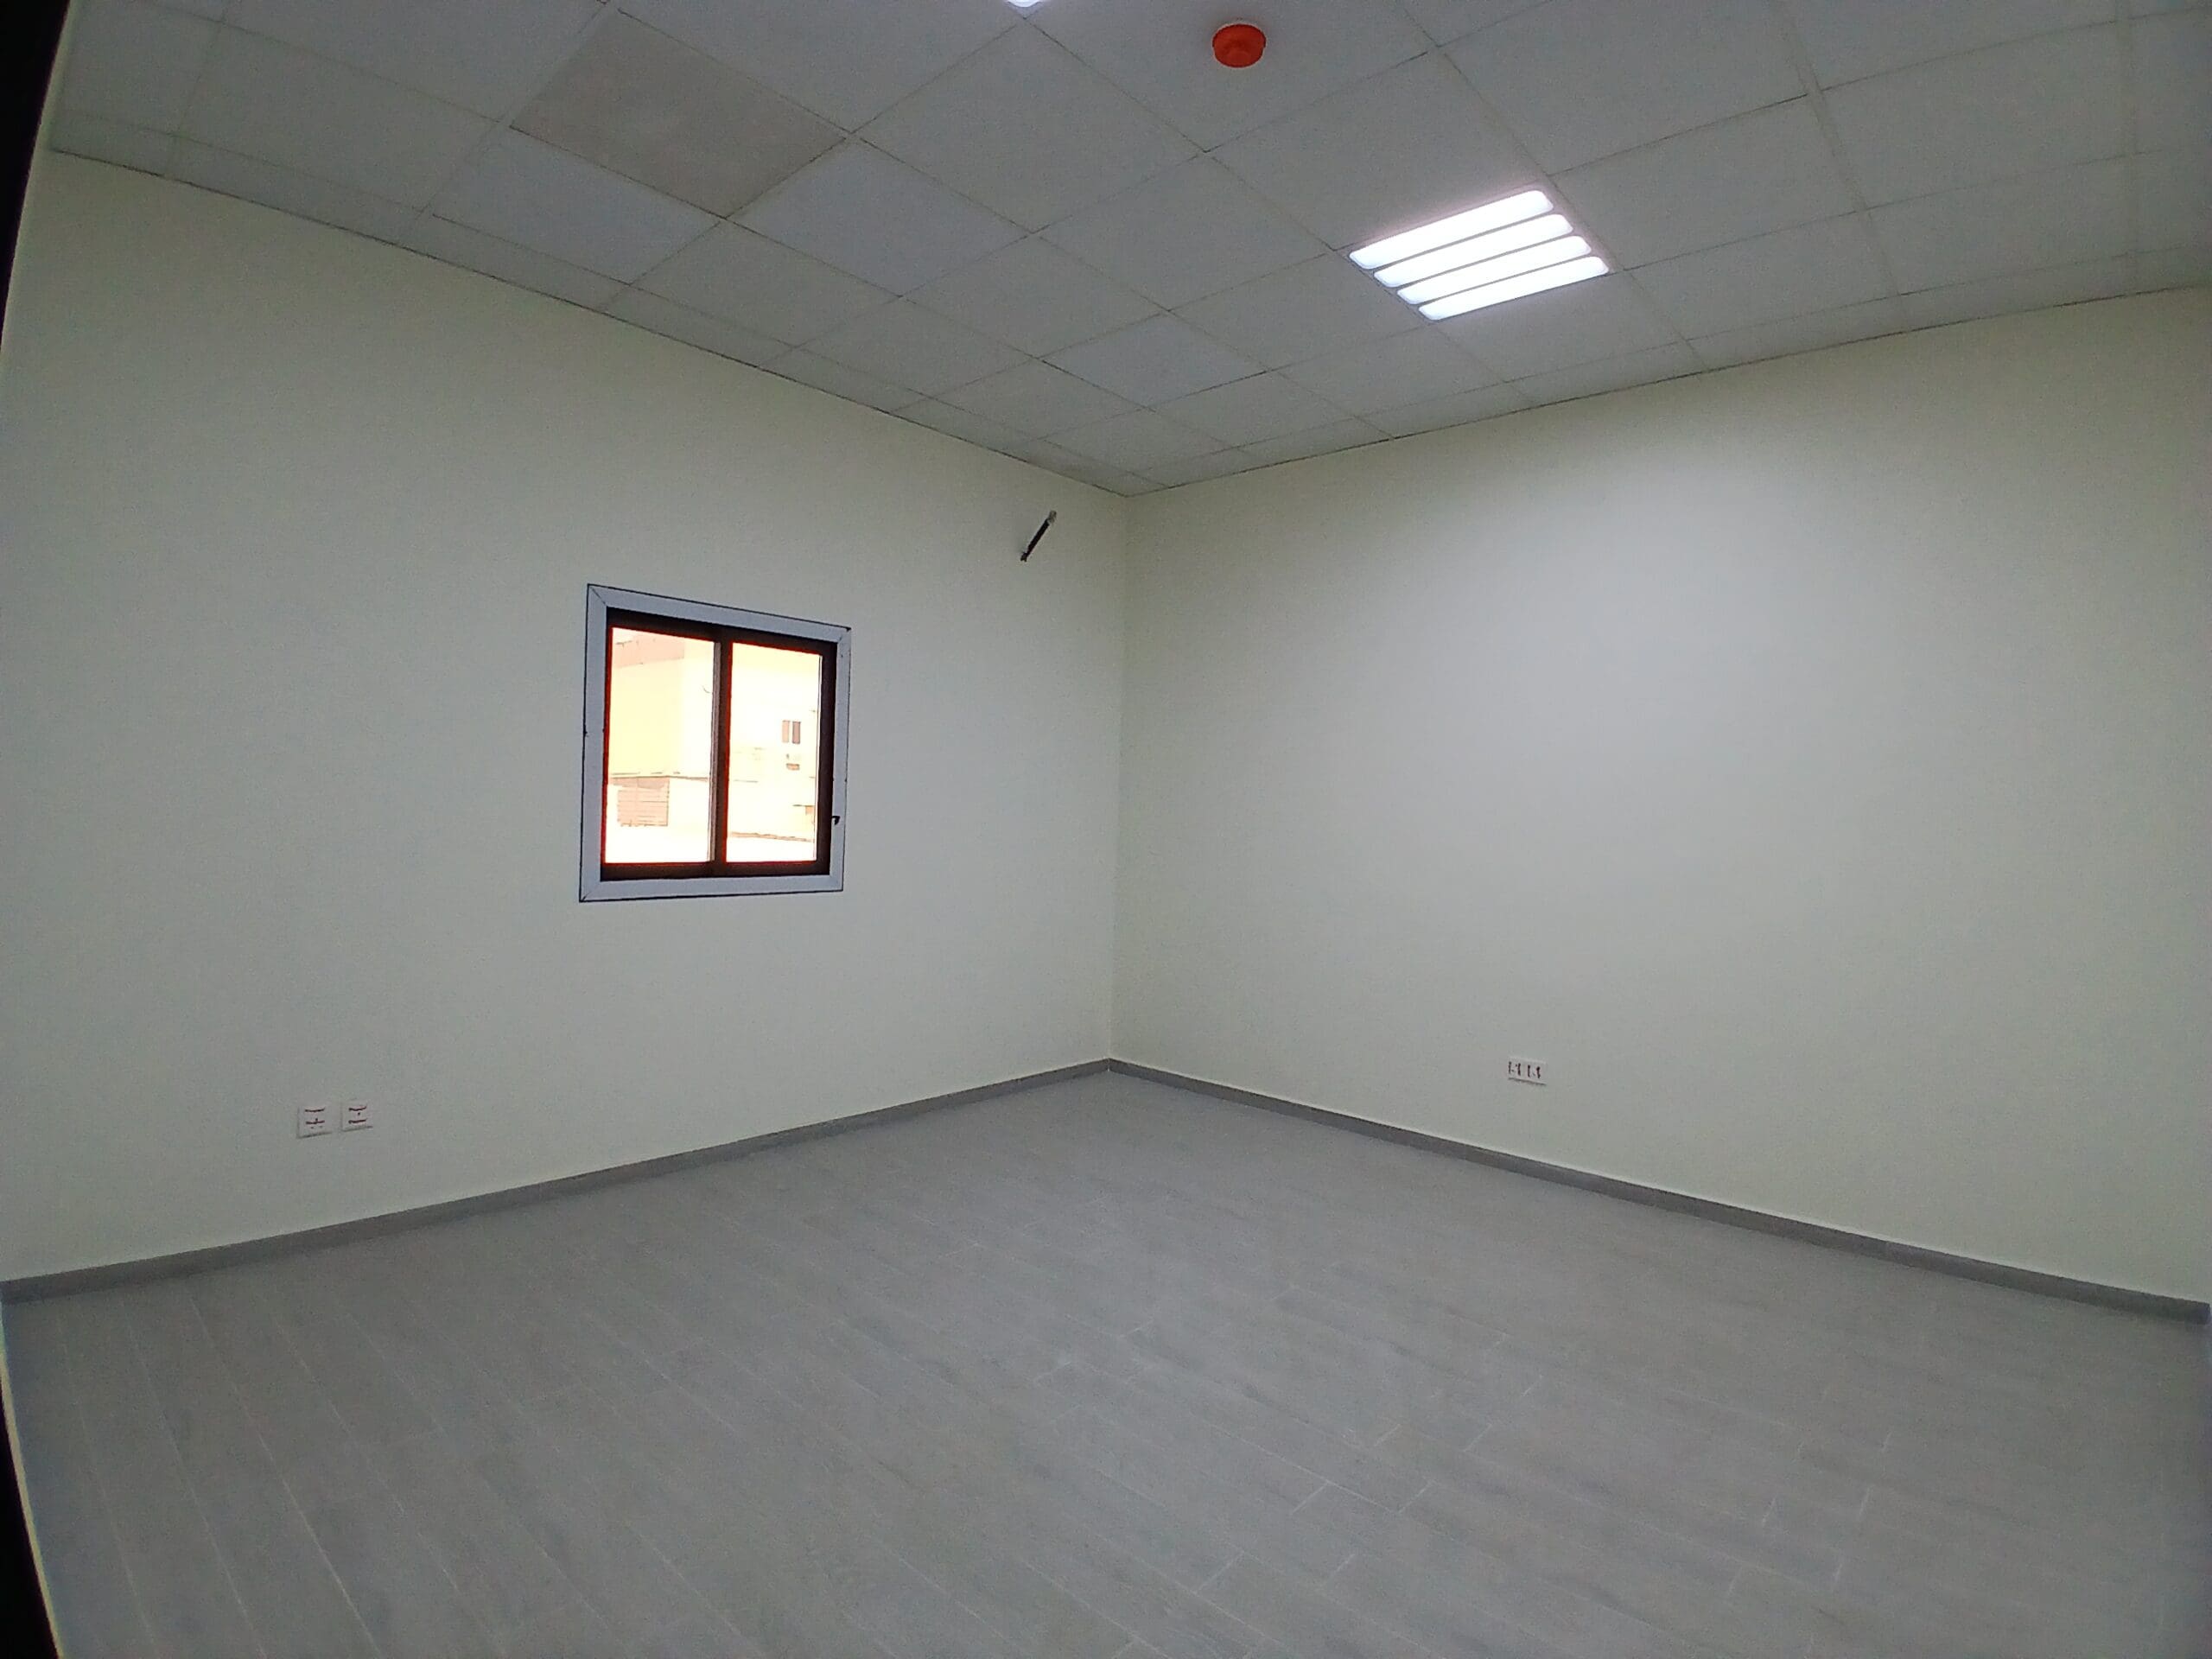 Empty modern office room with gray tiled floor, white walls, and a single window titled "Auto Draft.